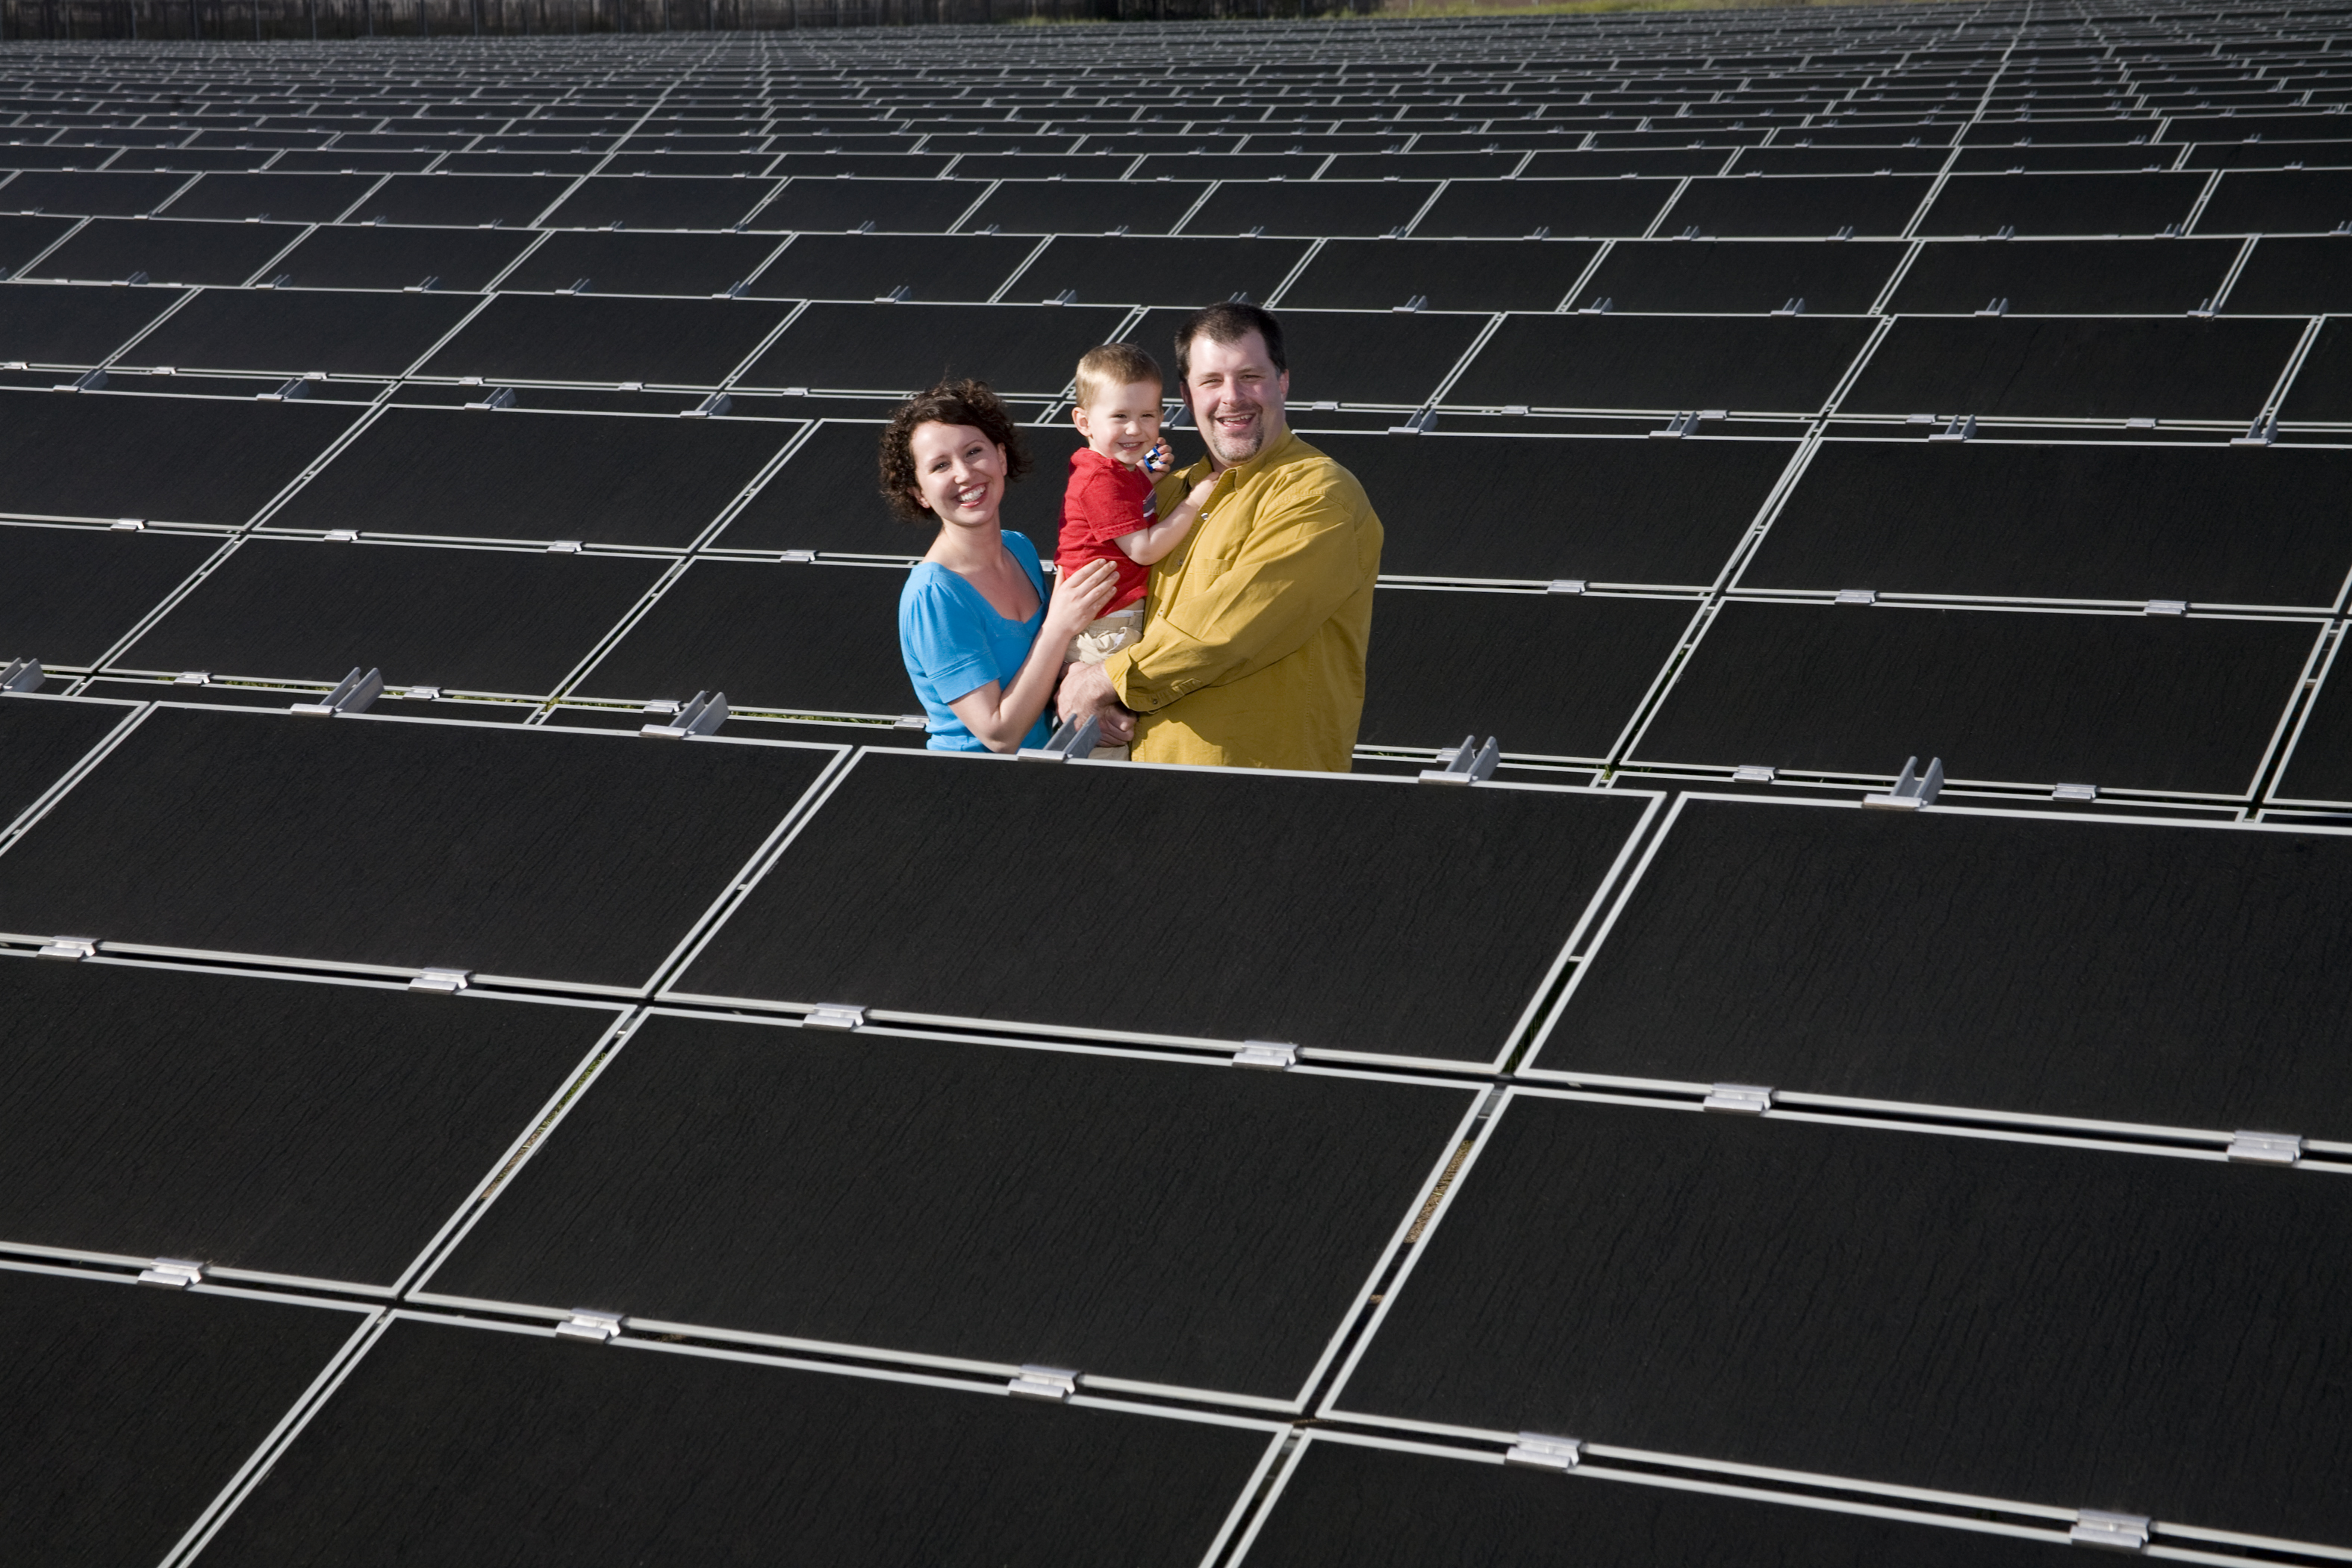 record-breaking-solar-power-creates-new-opportunities